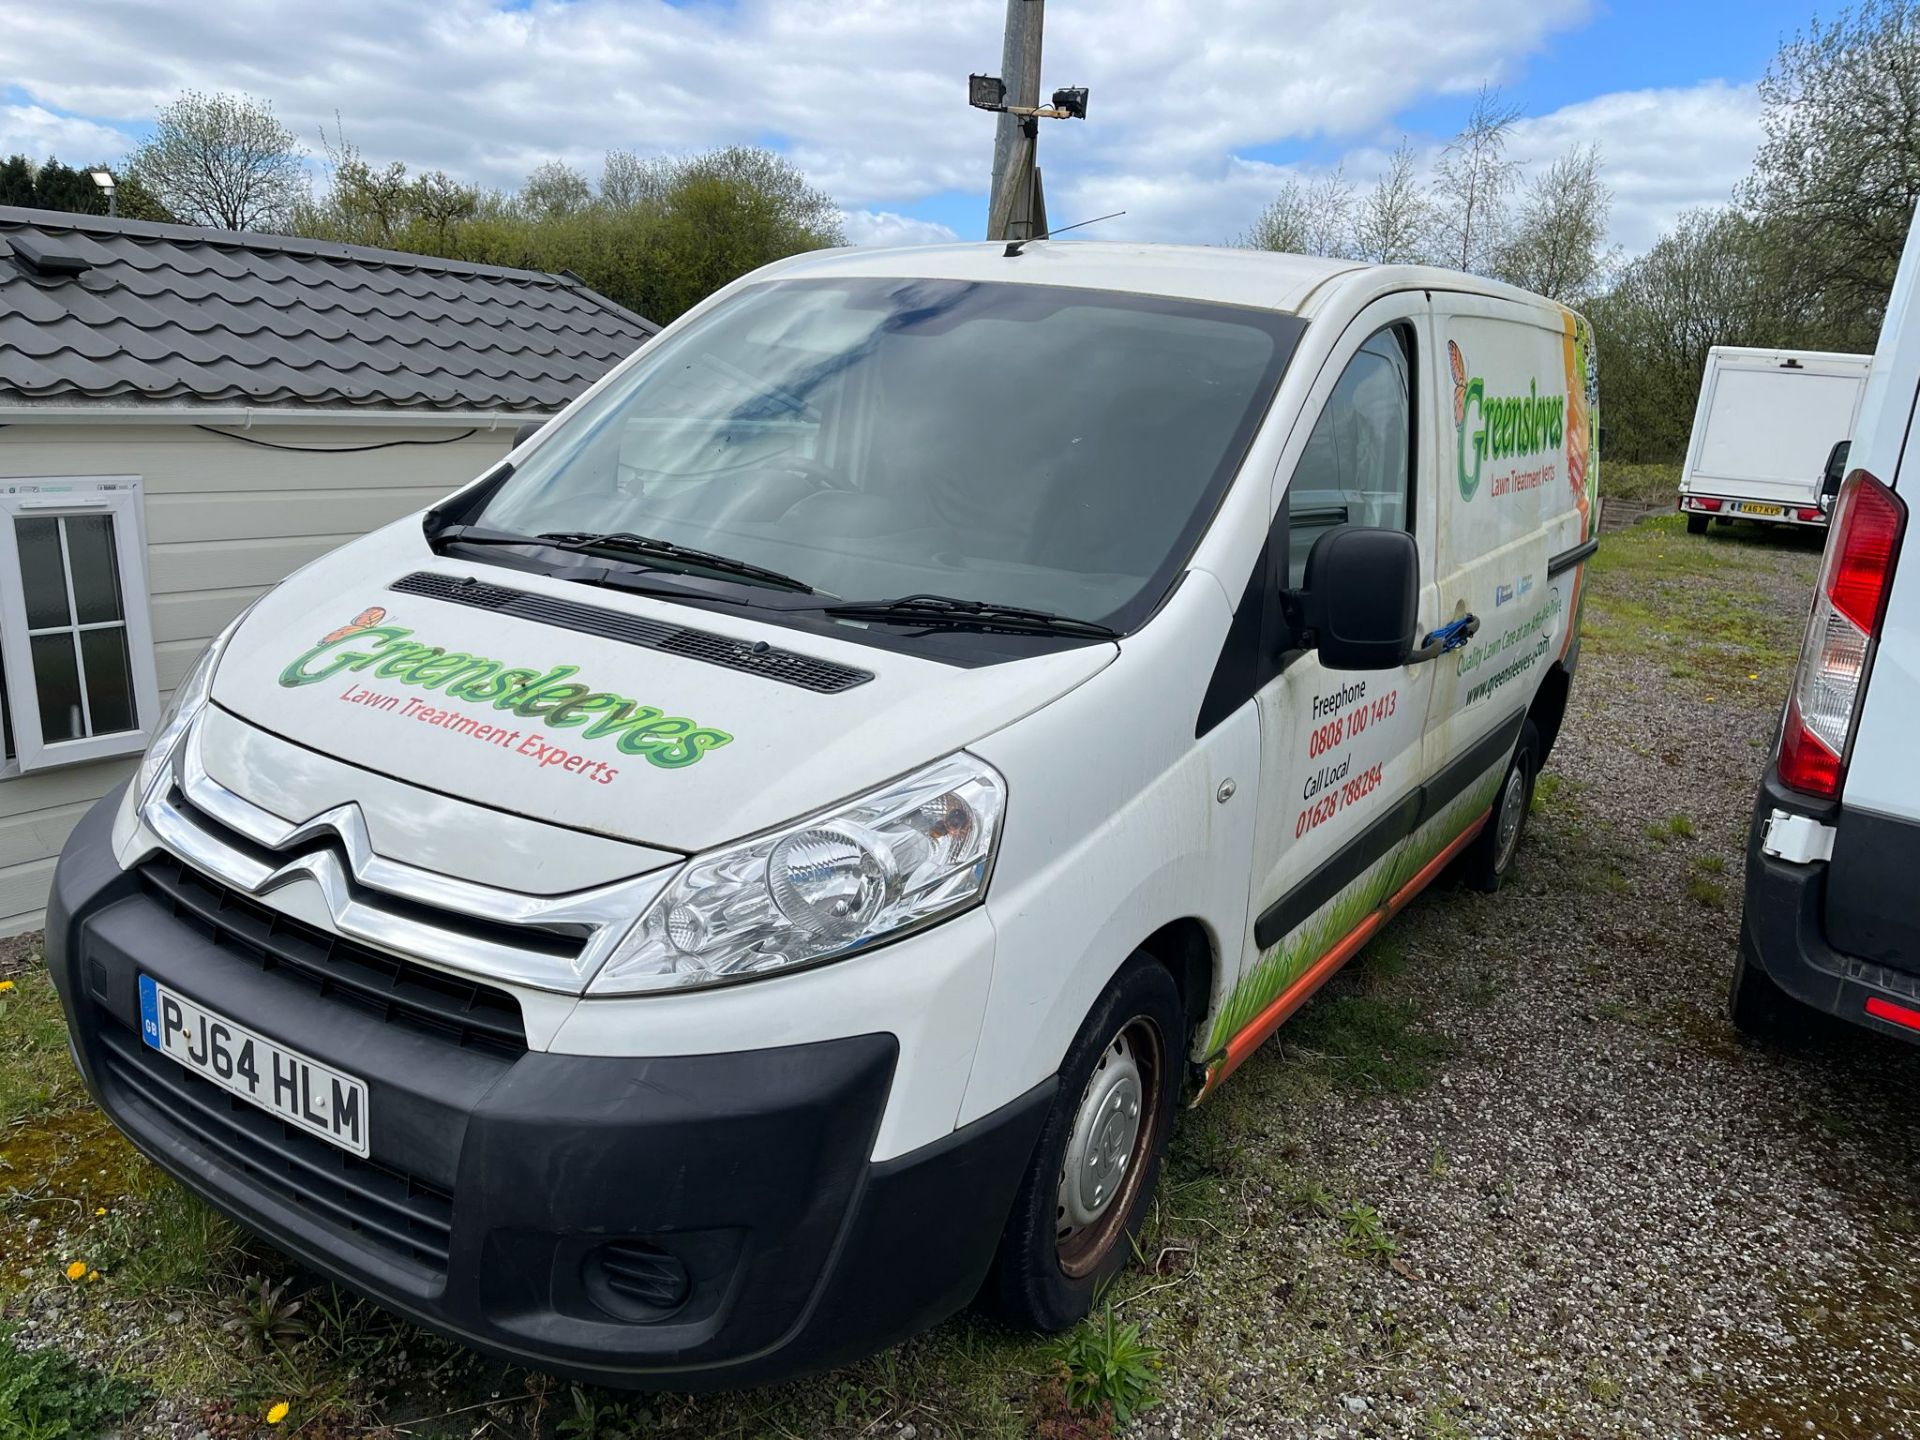 (NO VAT ON HAMMER) >>>SPECIAL CLEARANCE<<< 2014 CITROEN DISPATCH 1000 L1H1 1.6 HDI - NON-RUNNER - Image 4 of 5